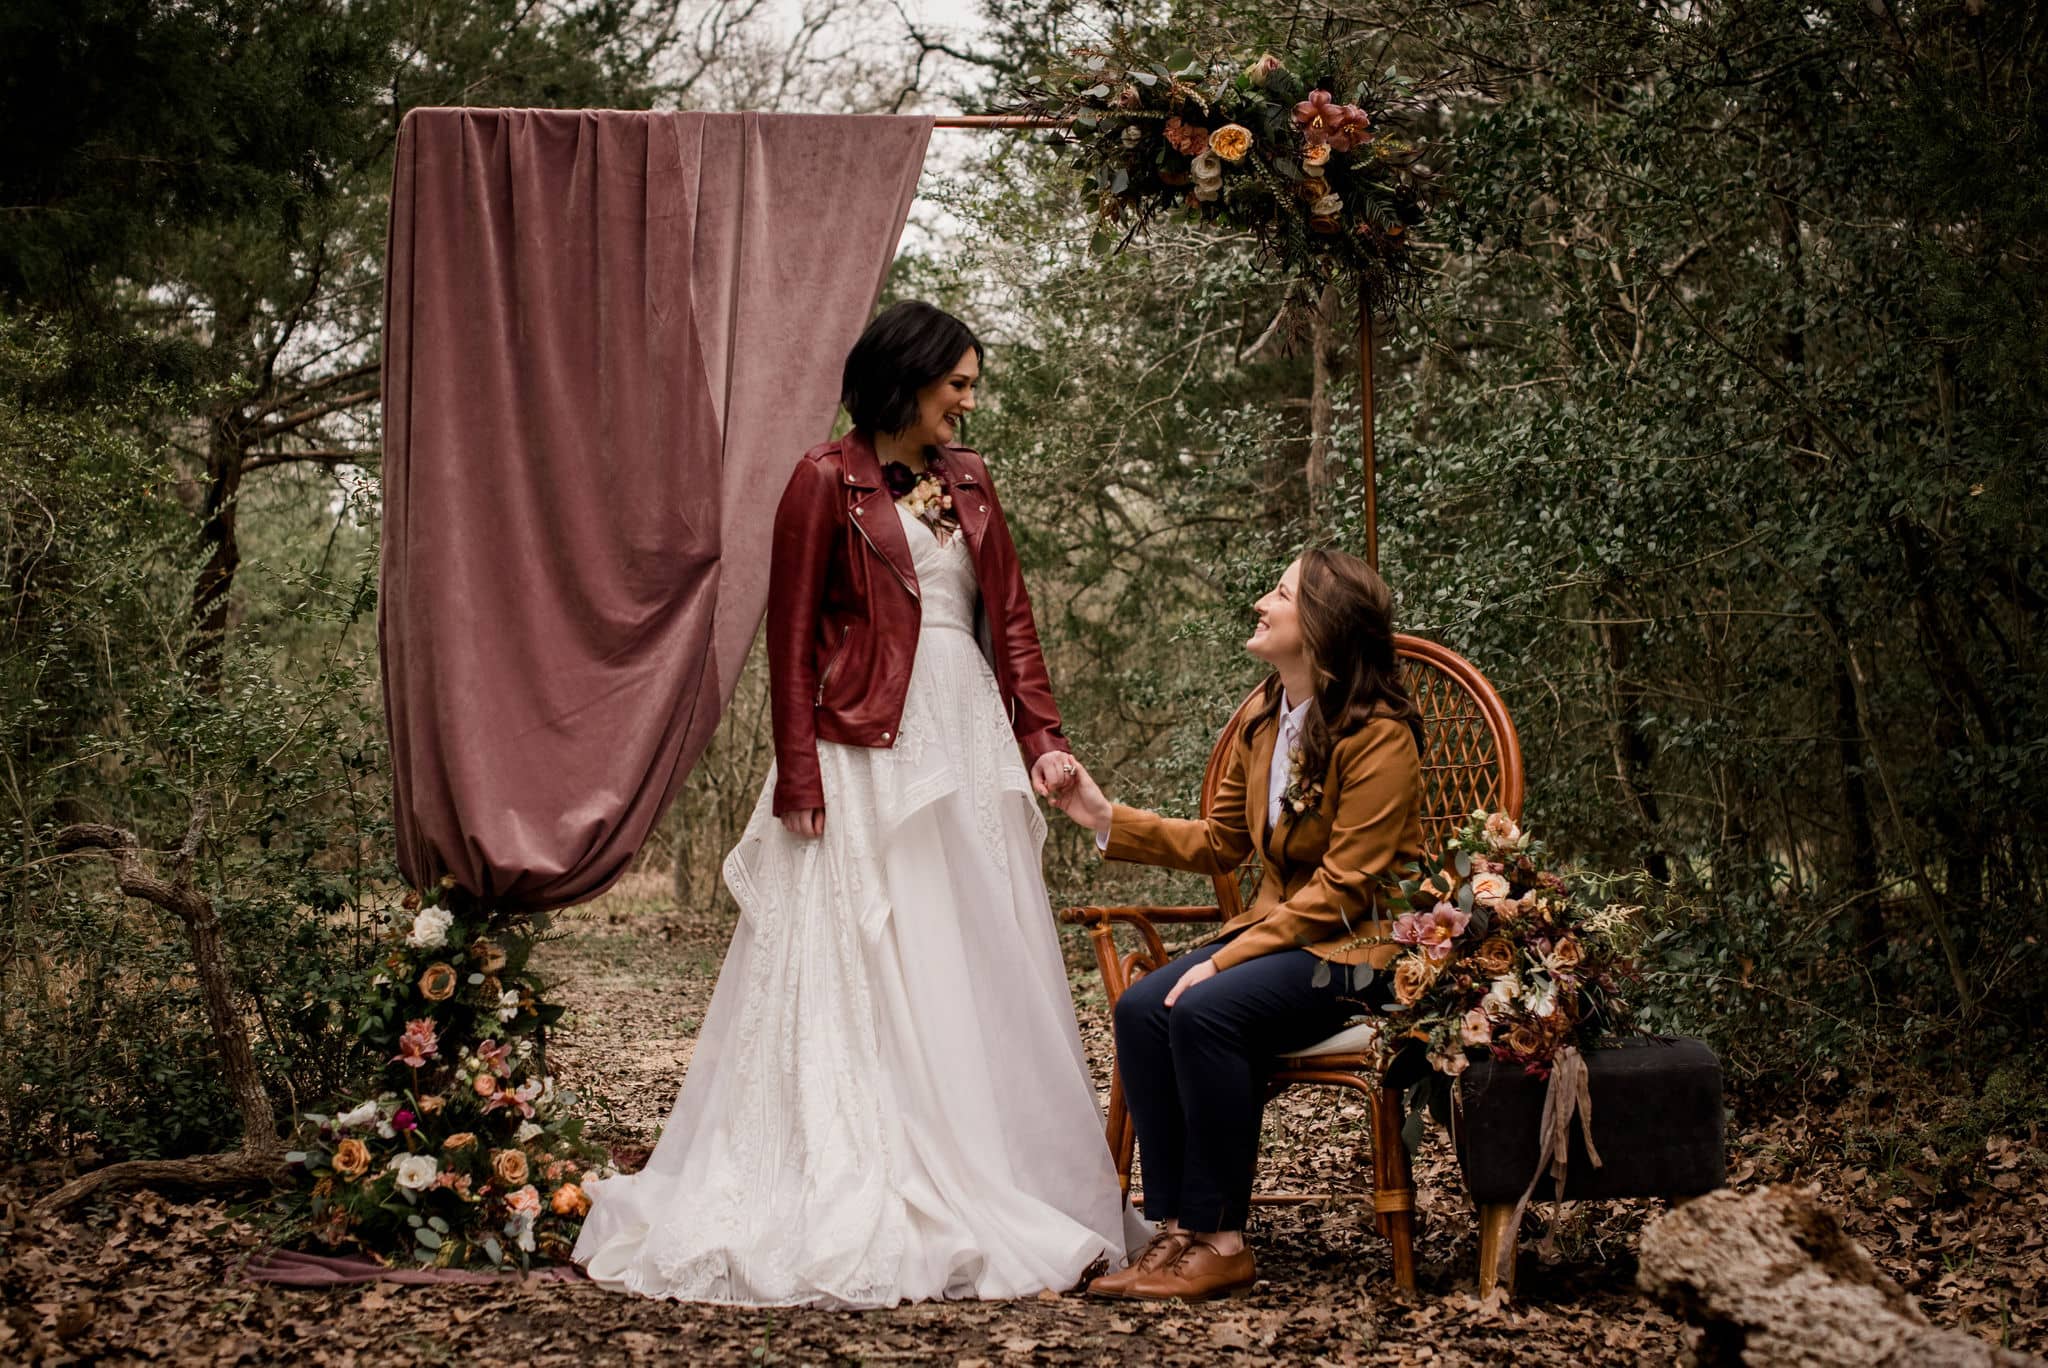 at the back courtyard of peach creek ranch, the texas brides are posed with a decorative backdrop of a mauve arch. the texas bride in a mustard yellow suite is seated while the texas bride in a red jacket and white dress is holding her hand